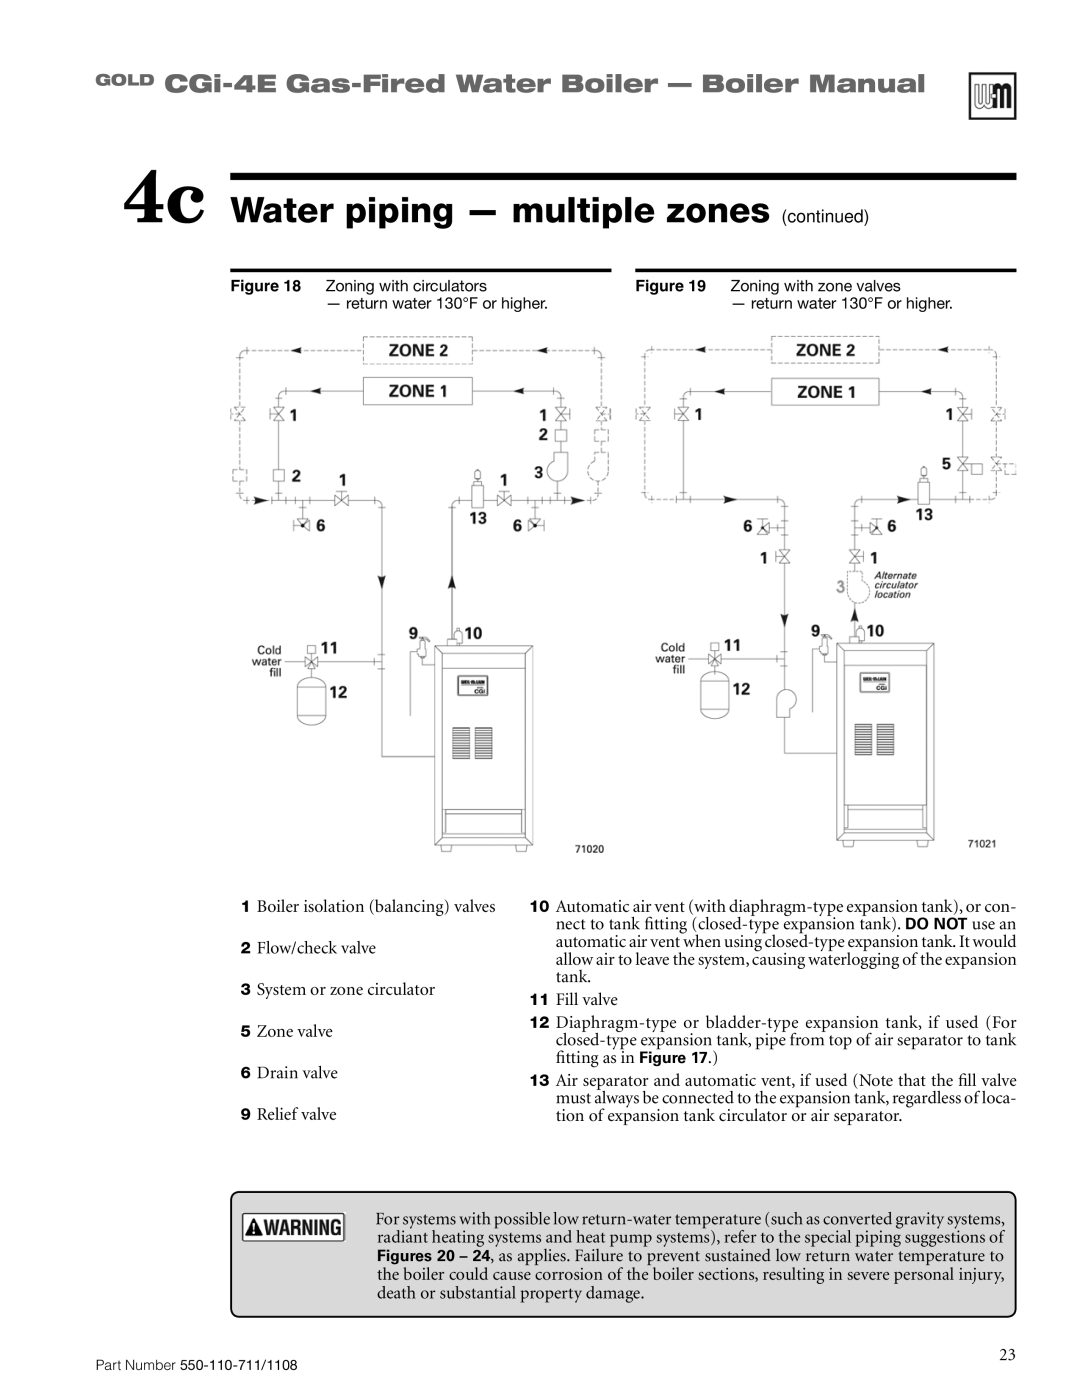 Weil-McLain CGI-4E manual 4c Water piping — multiple zones continued, GOLD CGi-4E Gas-FiredWater Boiler - Boiler Manual 